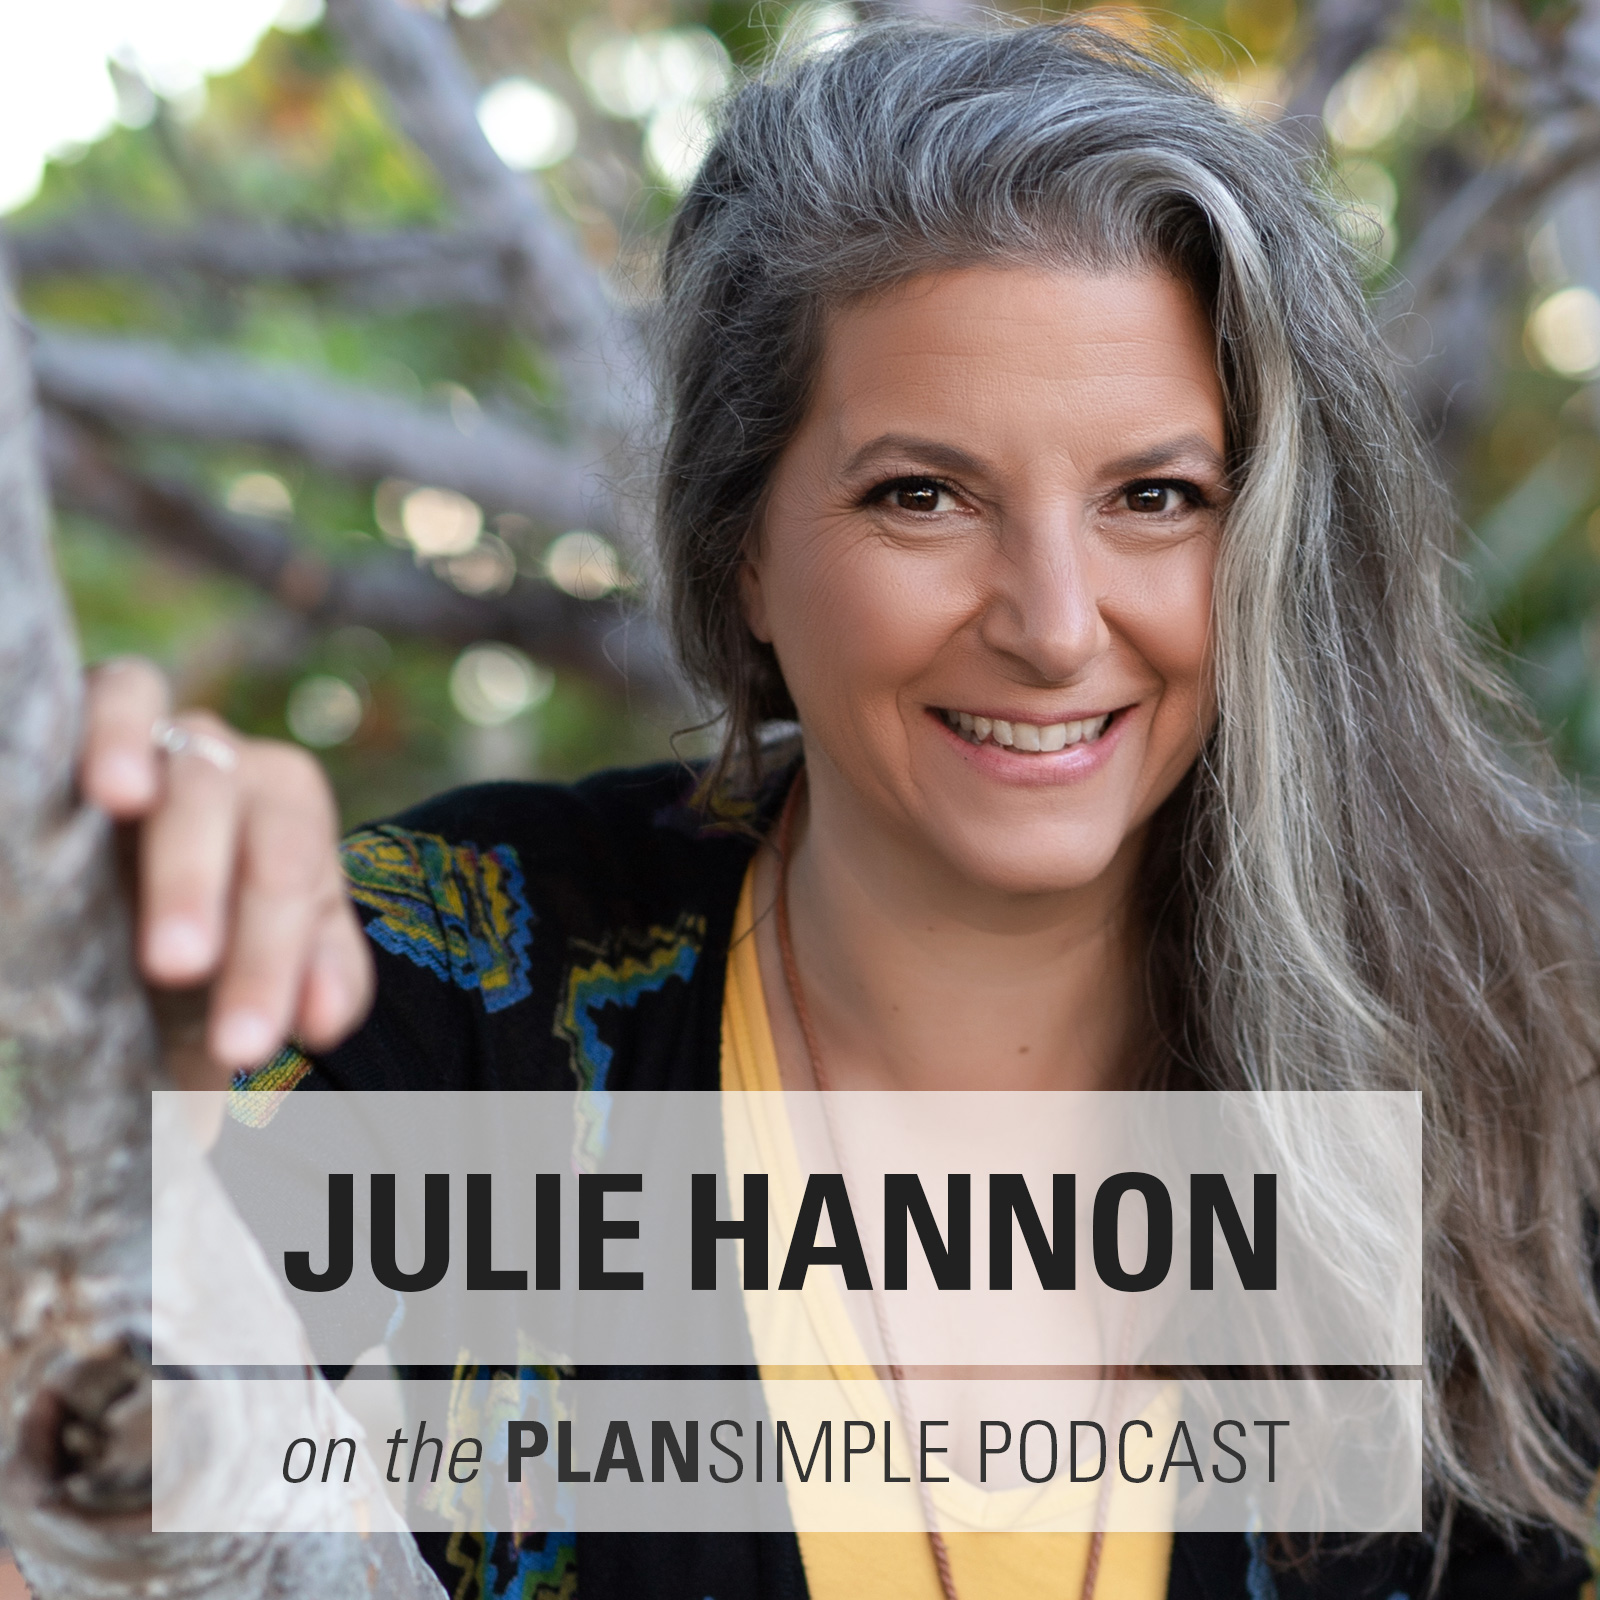 Making Space For The Sacred With Julie Hannon